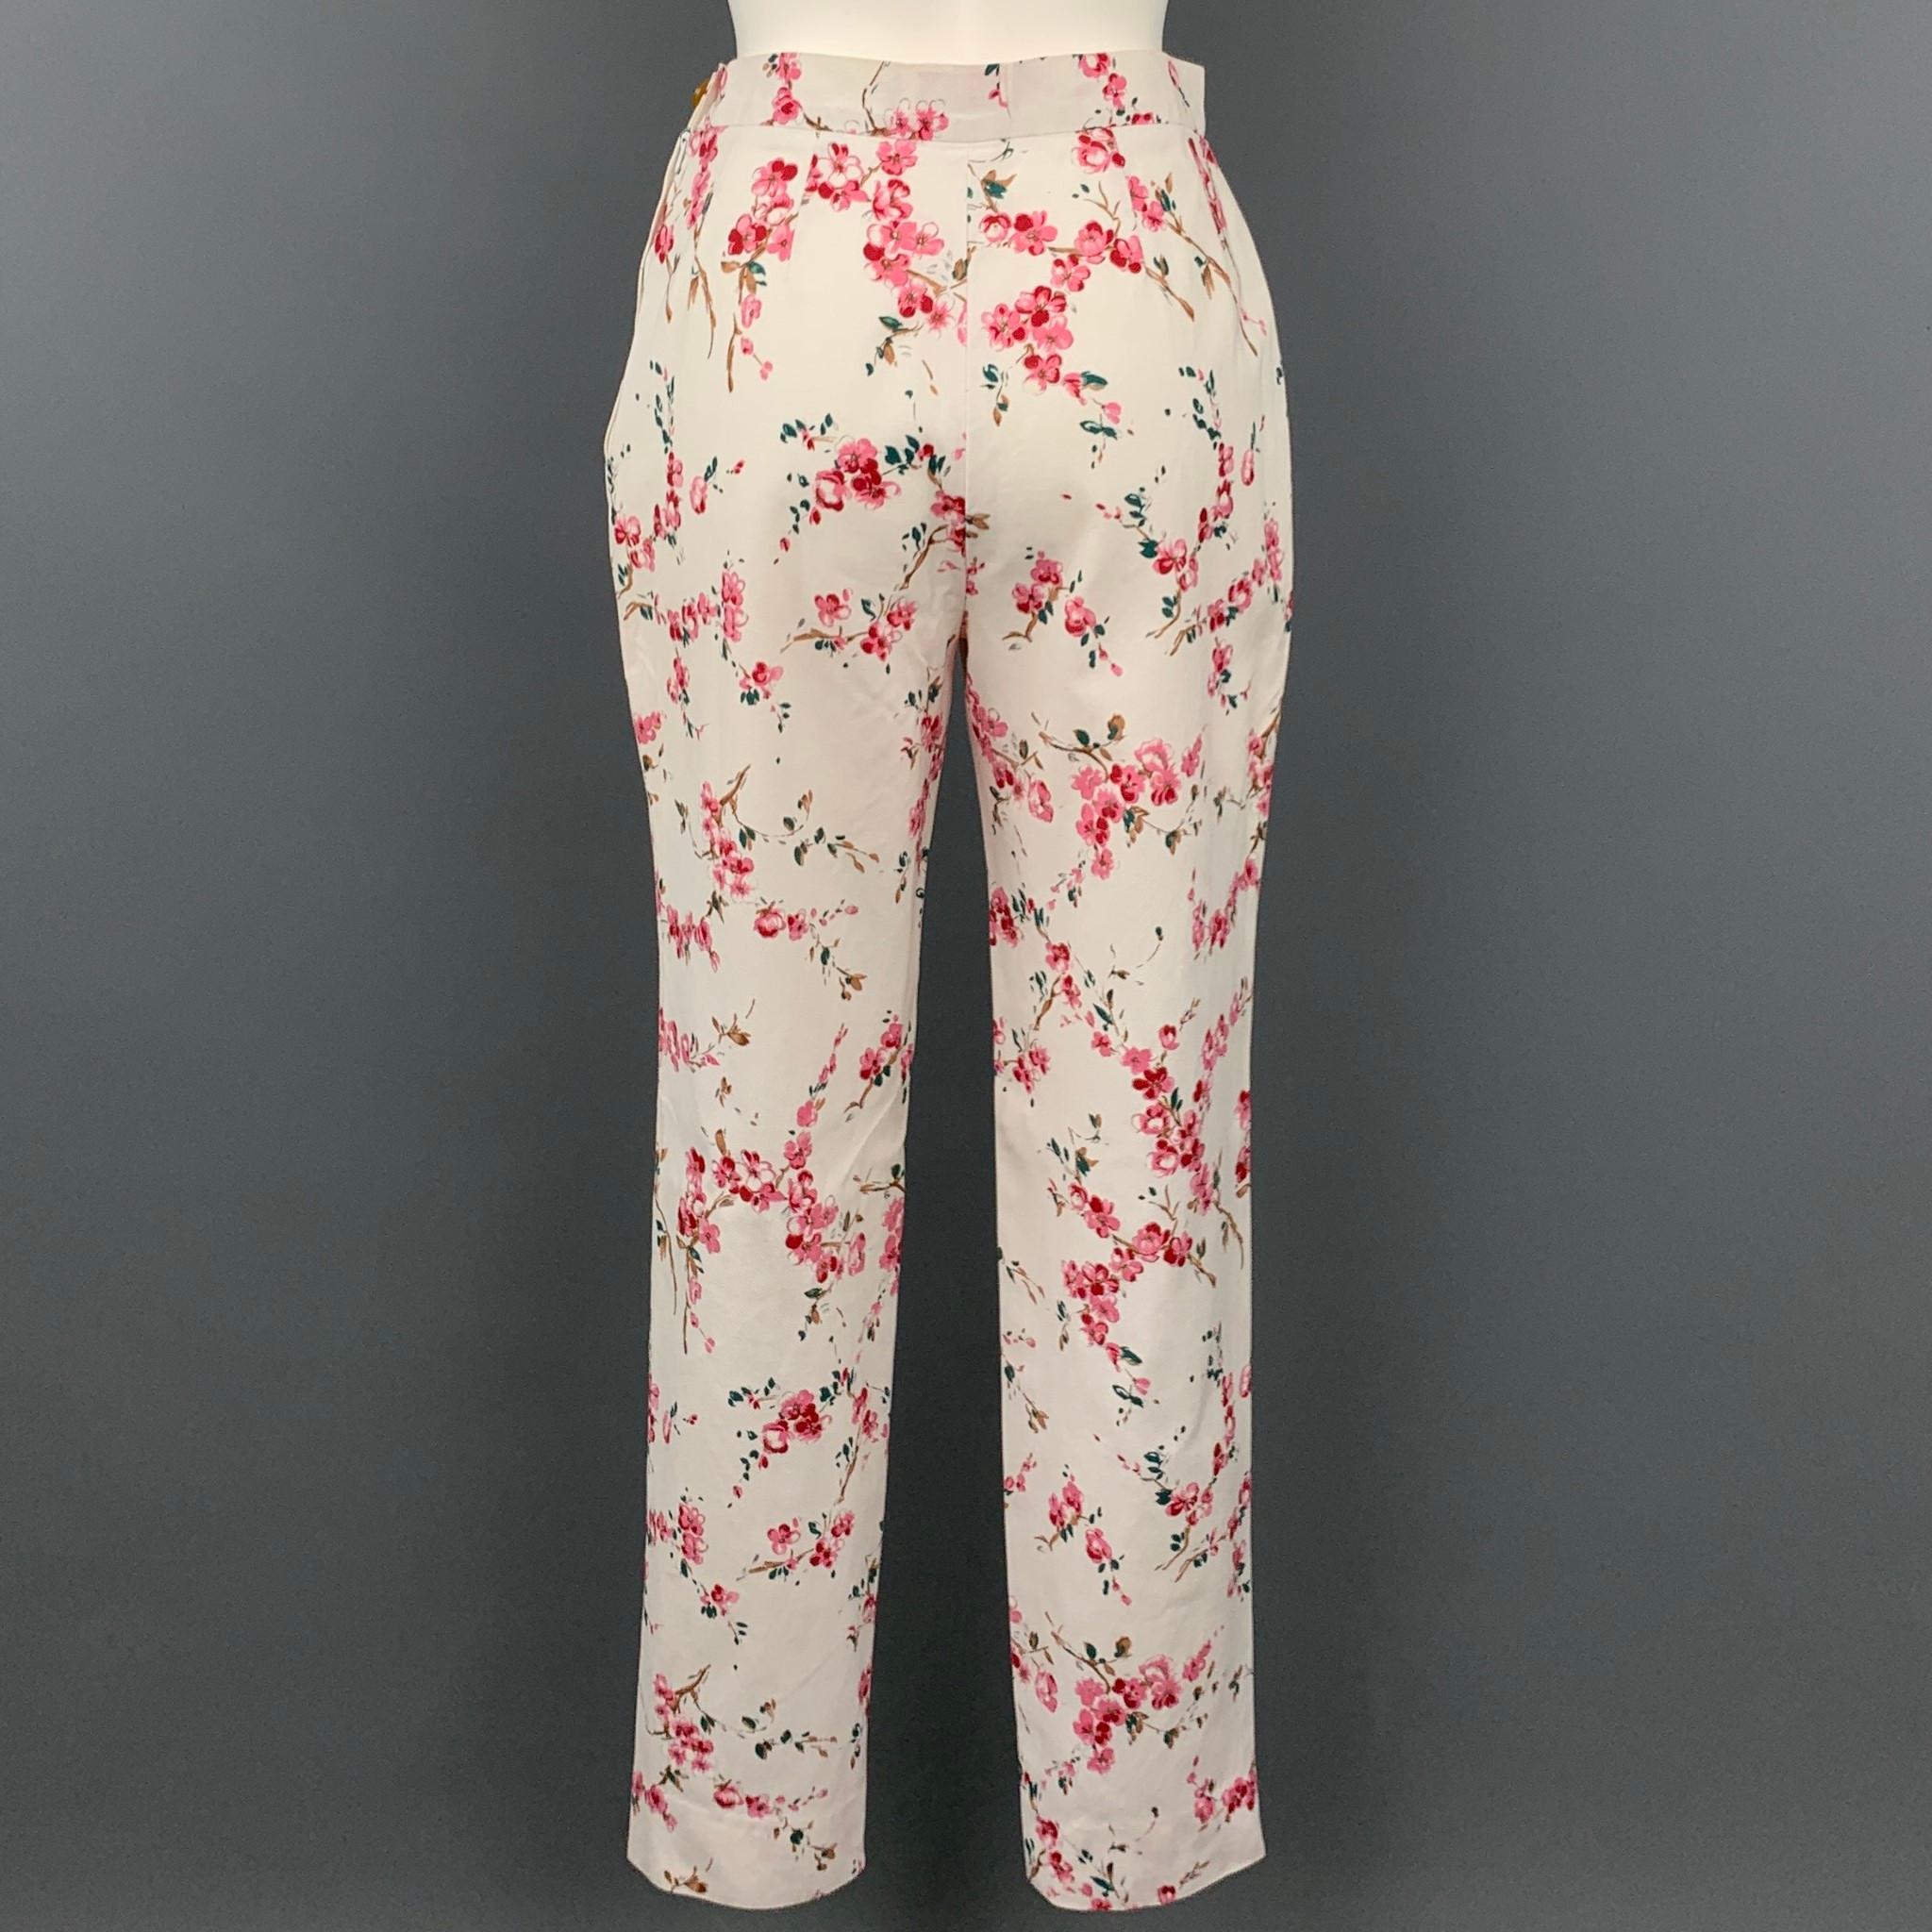 VIVIENNE WESTWOOD casual pant comes in a white & pink floral cotton featuring a high waisted style, pleated, and a side zipper closure. Moderate wear with some color transfer.

Very Good Pre-Owned Condition.
Marked: 44

Measurements:

Waist: 27